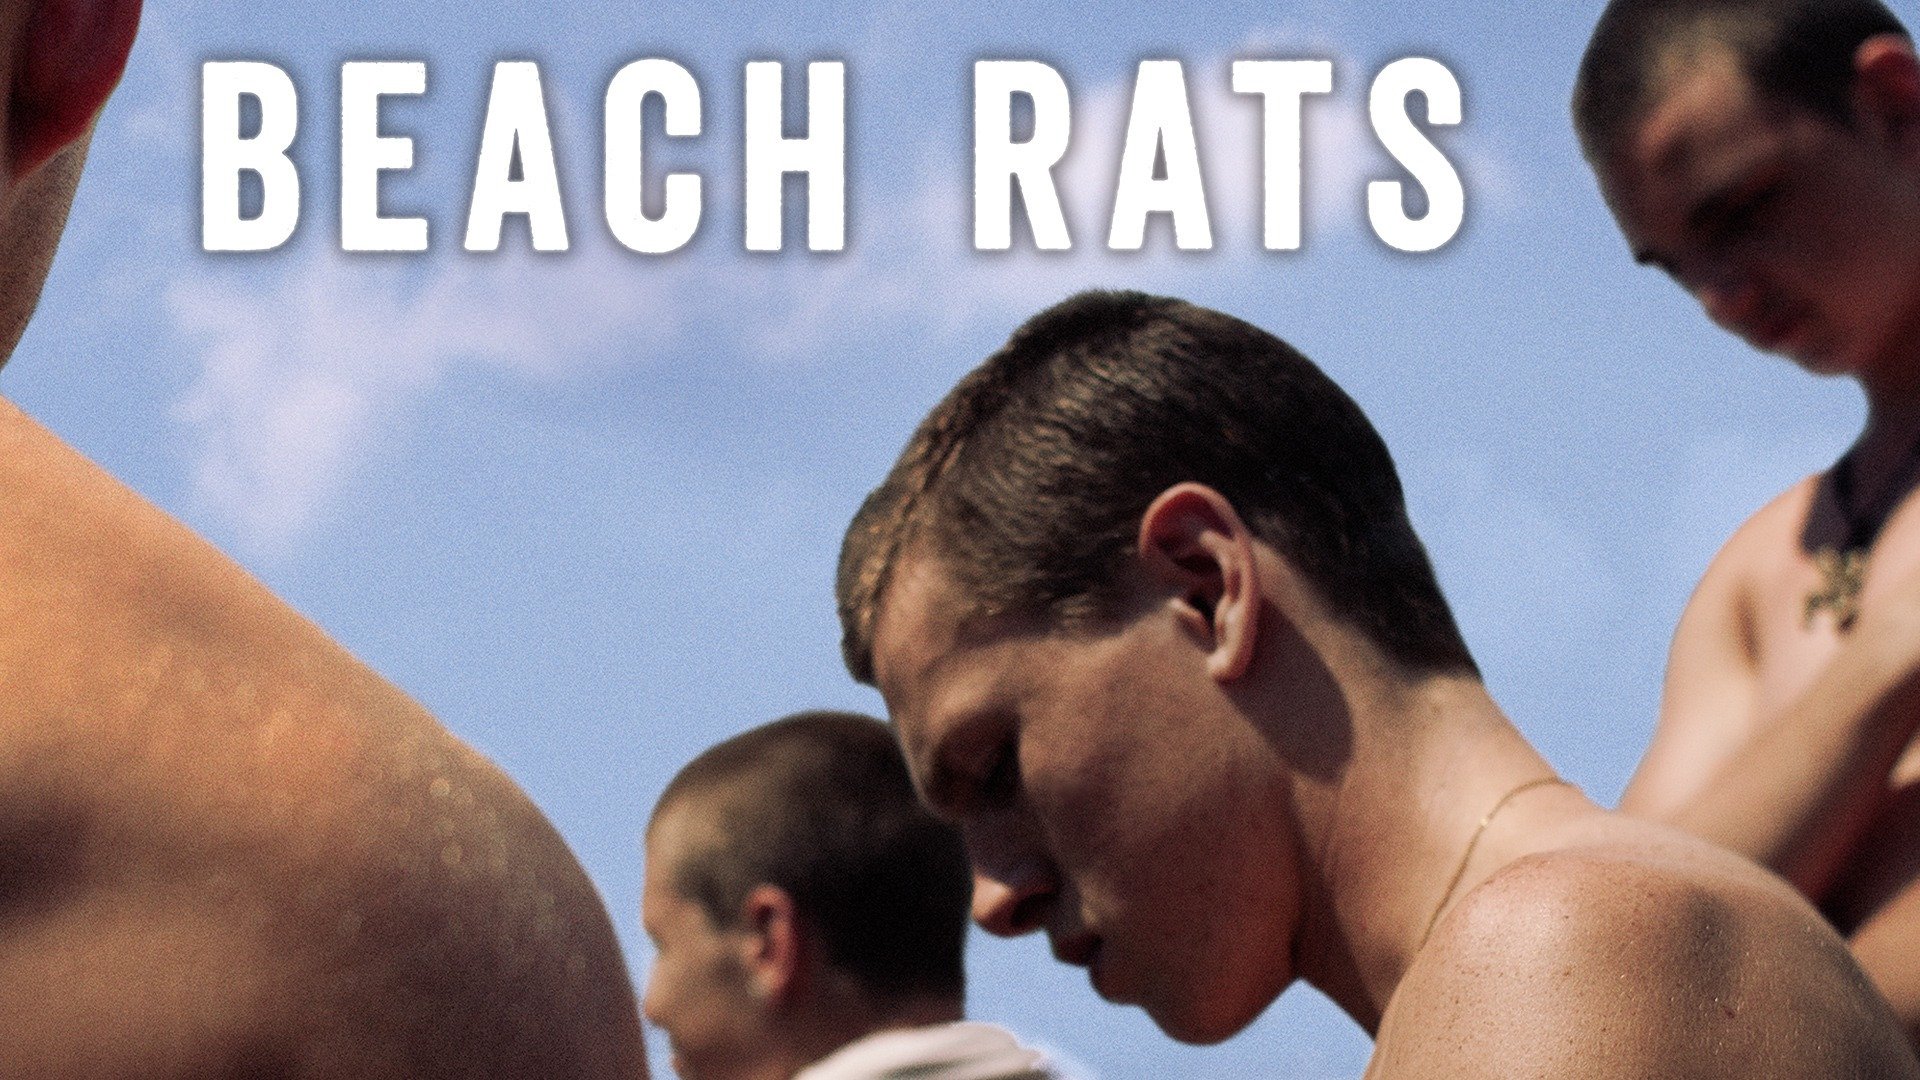 Beach Rats Trailer 1 Trailers And Videos Rotten Tomatoes